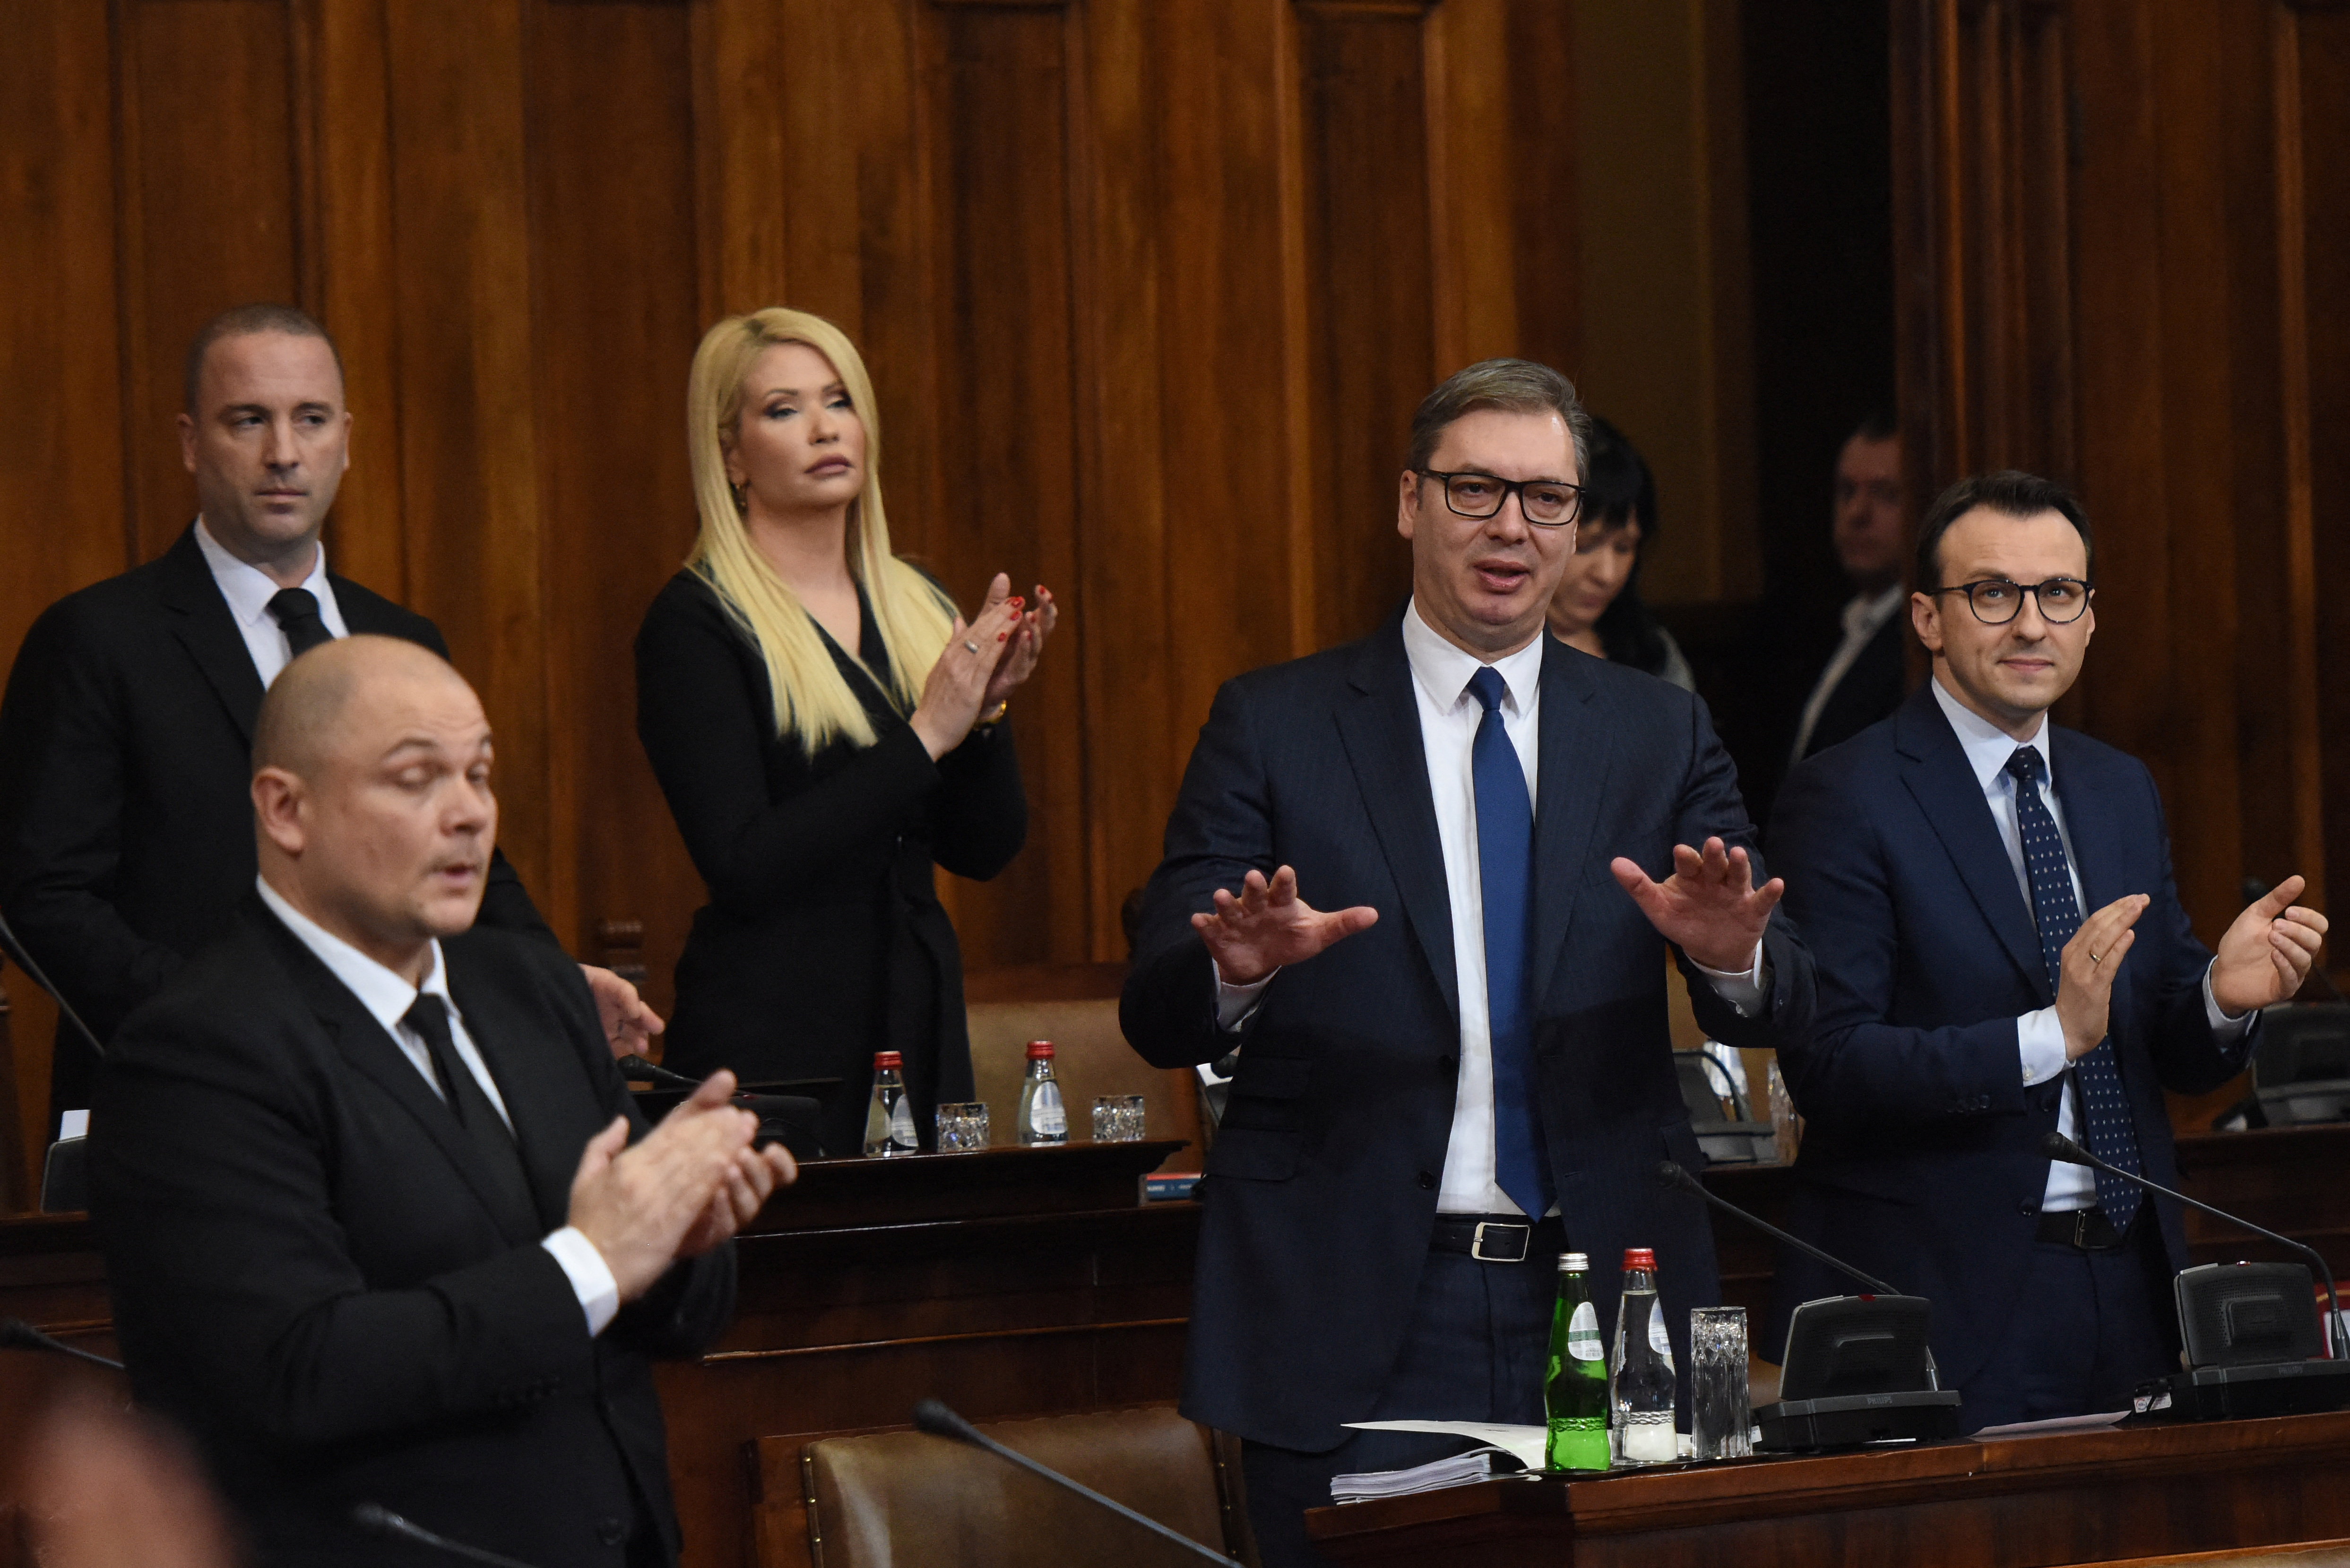 Serbia's President Aleksandar Vucic gestures during a special session of Serbia's parliament about the negotiations process with Kosovo in Belgrade